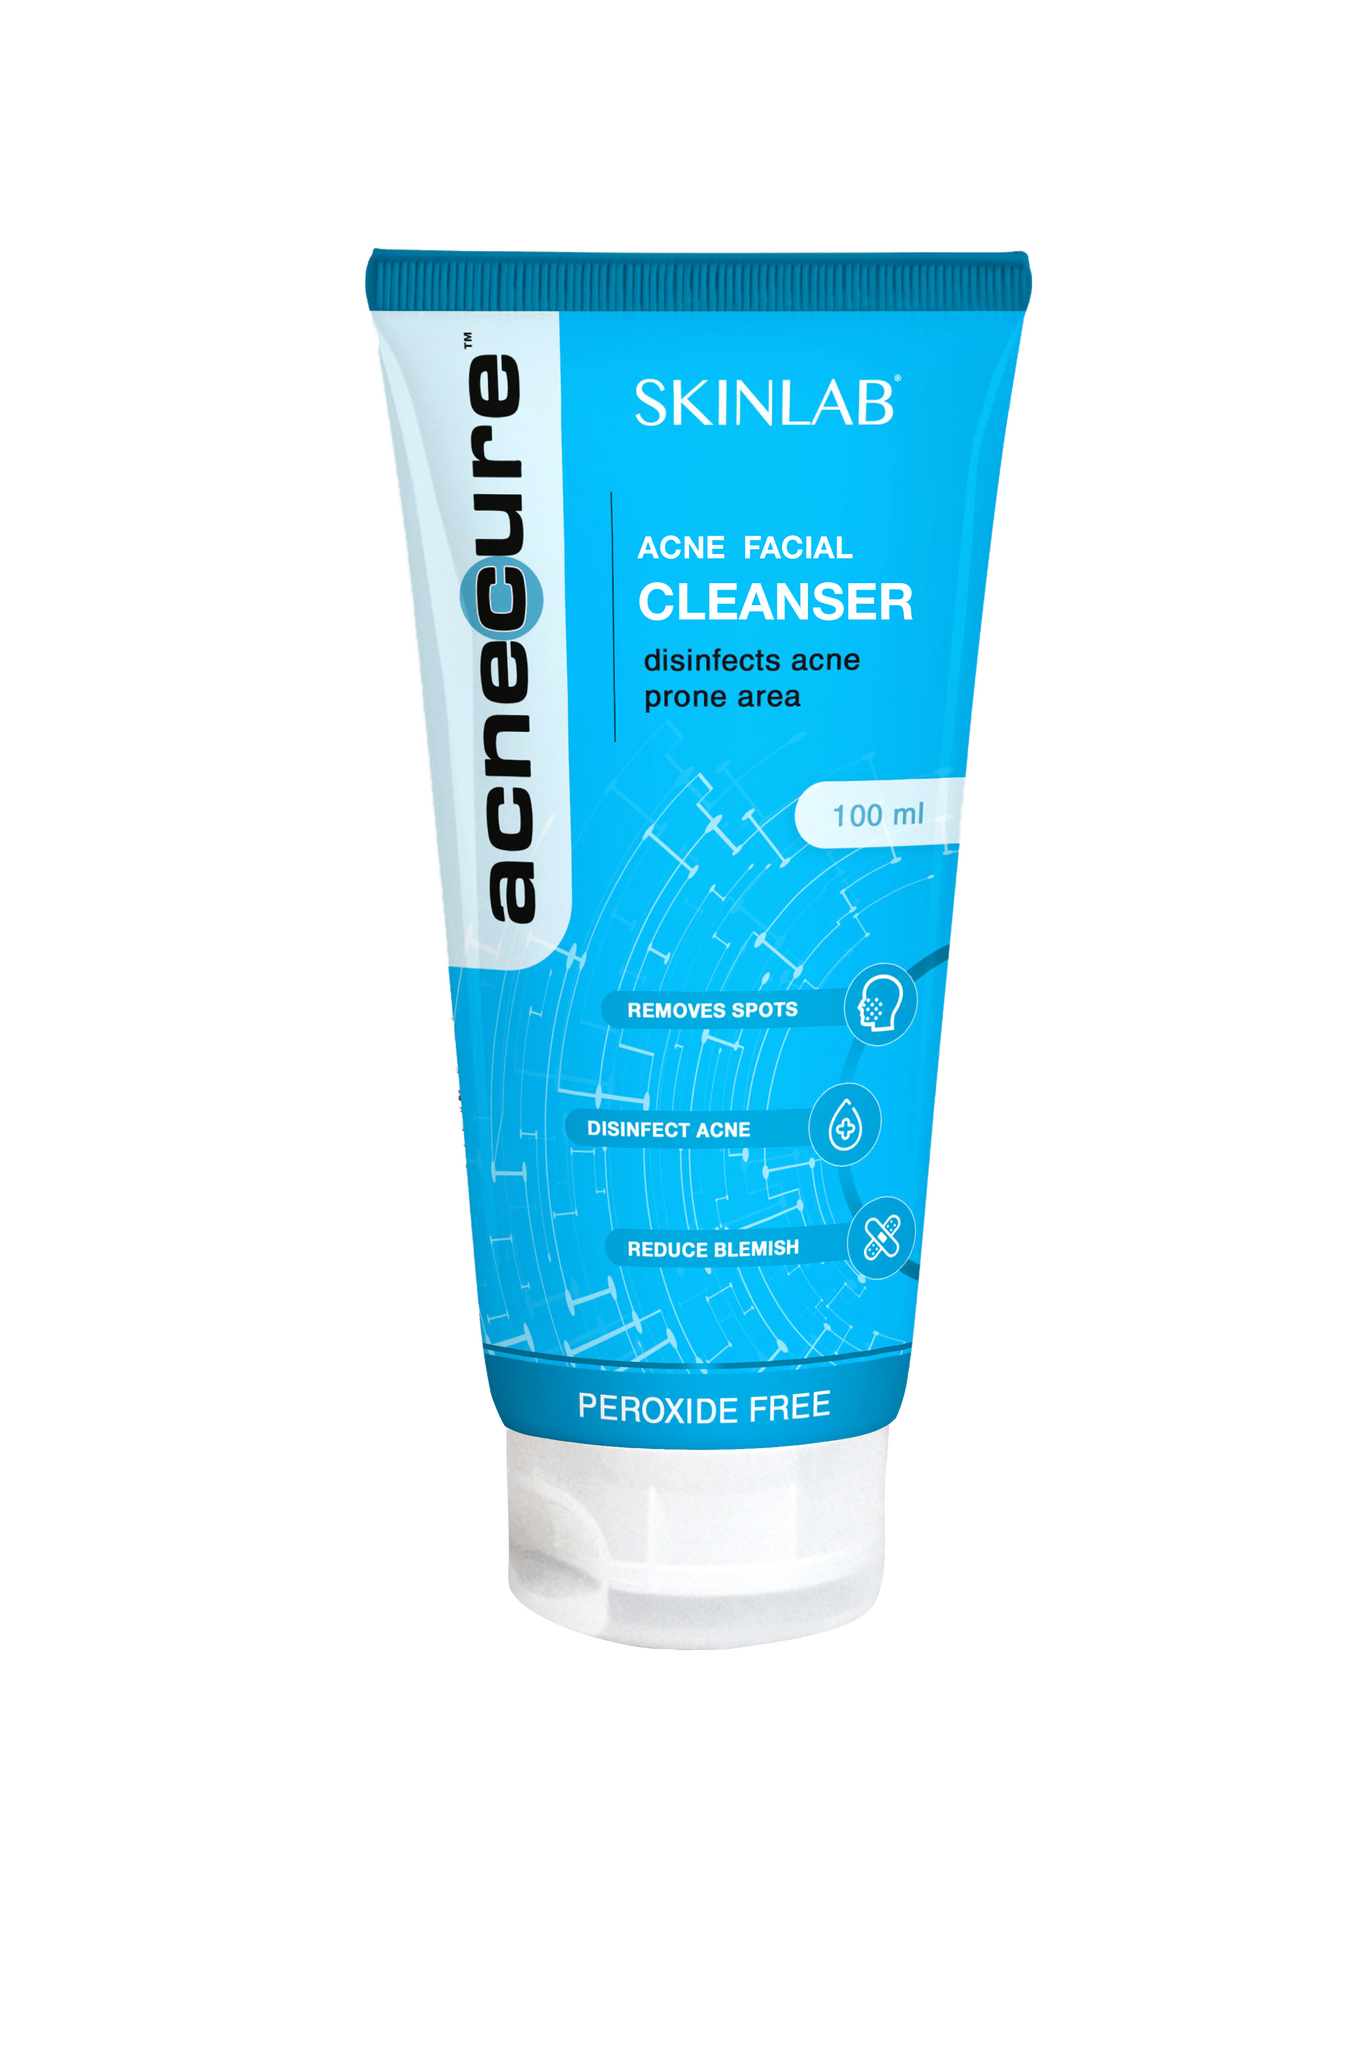 Acnecure - Acne Facial Cleanser